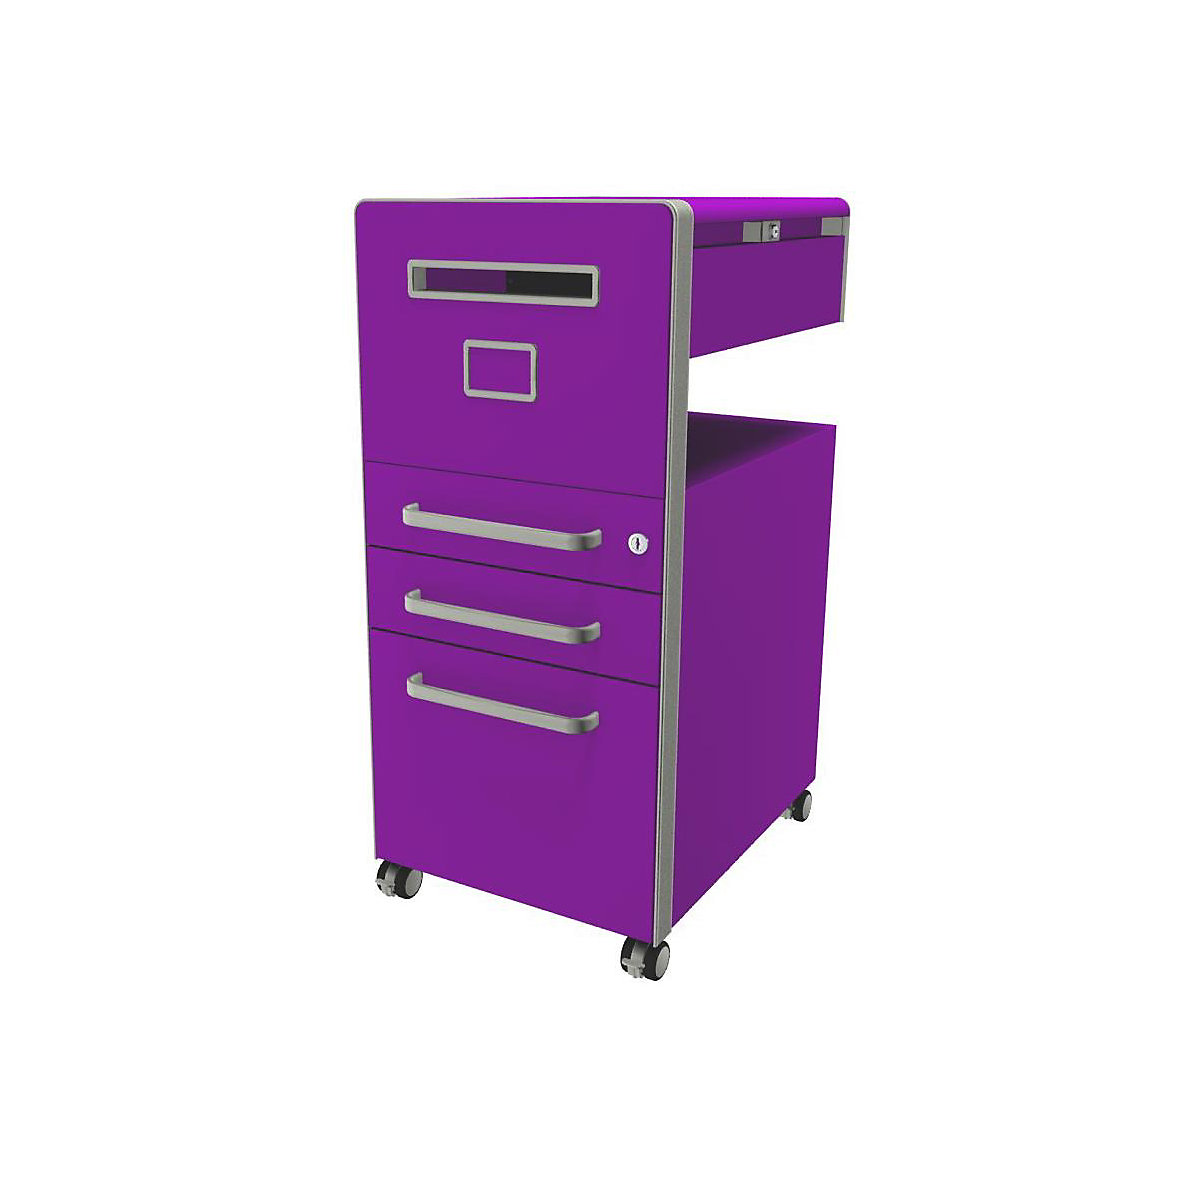 Bite™ pedestal furniture, with 1 whiteboard, opens on the left side – BISLEY, with 2 universal drawers, 1 suspension file drawer, fuchsia-28